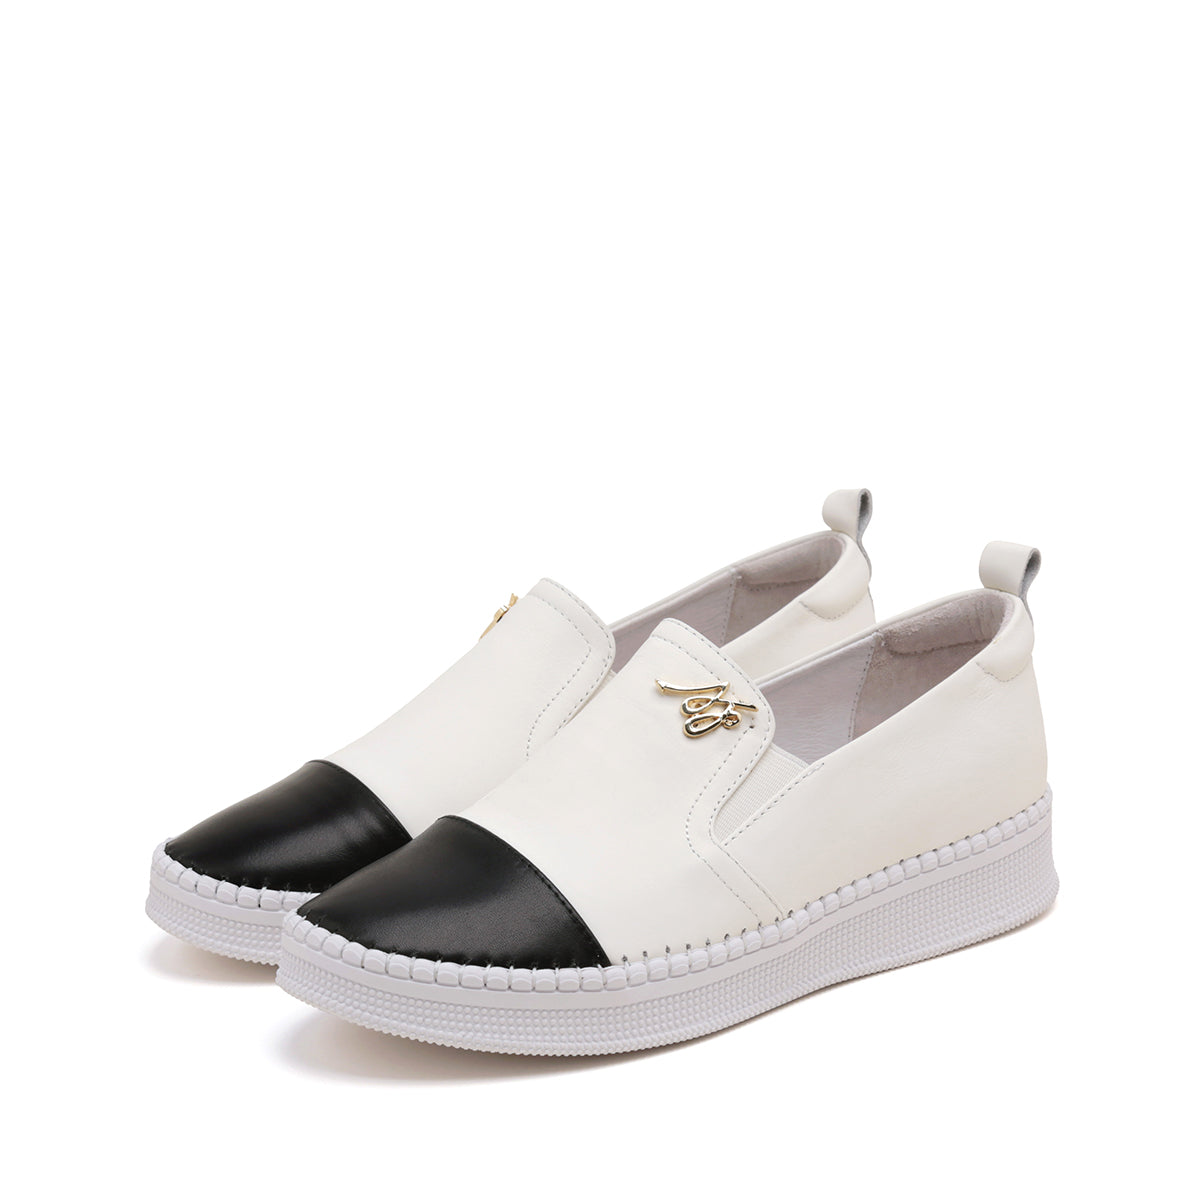 Black/white women's casual shoes